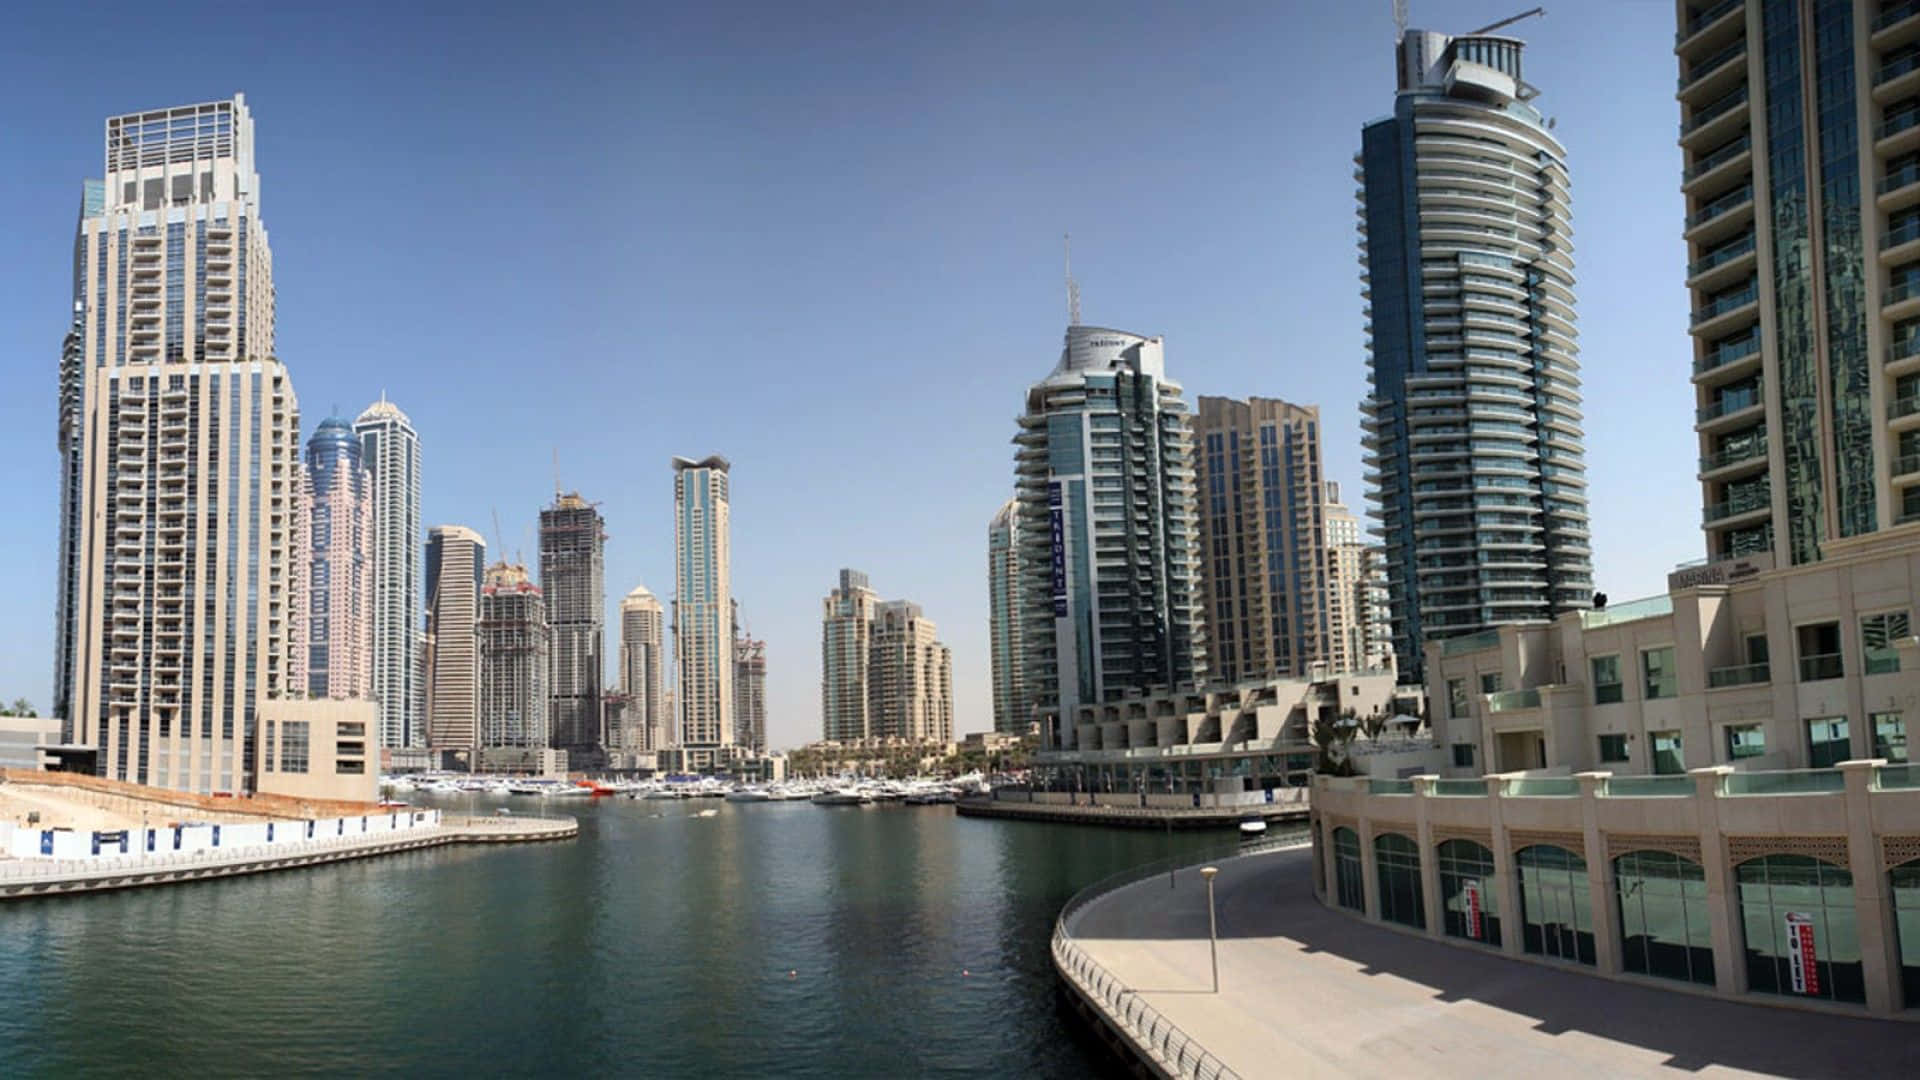 A View Of The Marina In Dubai